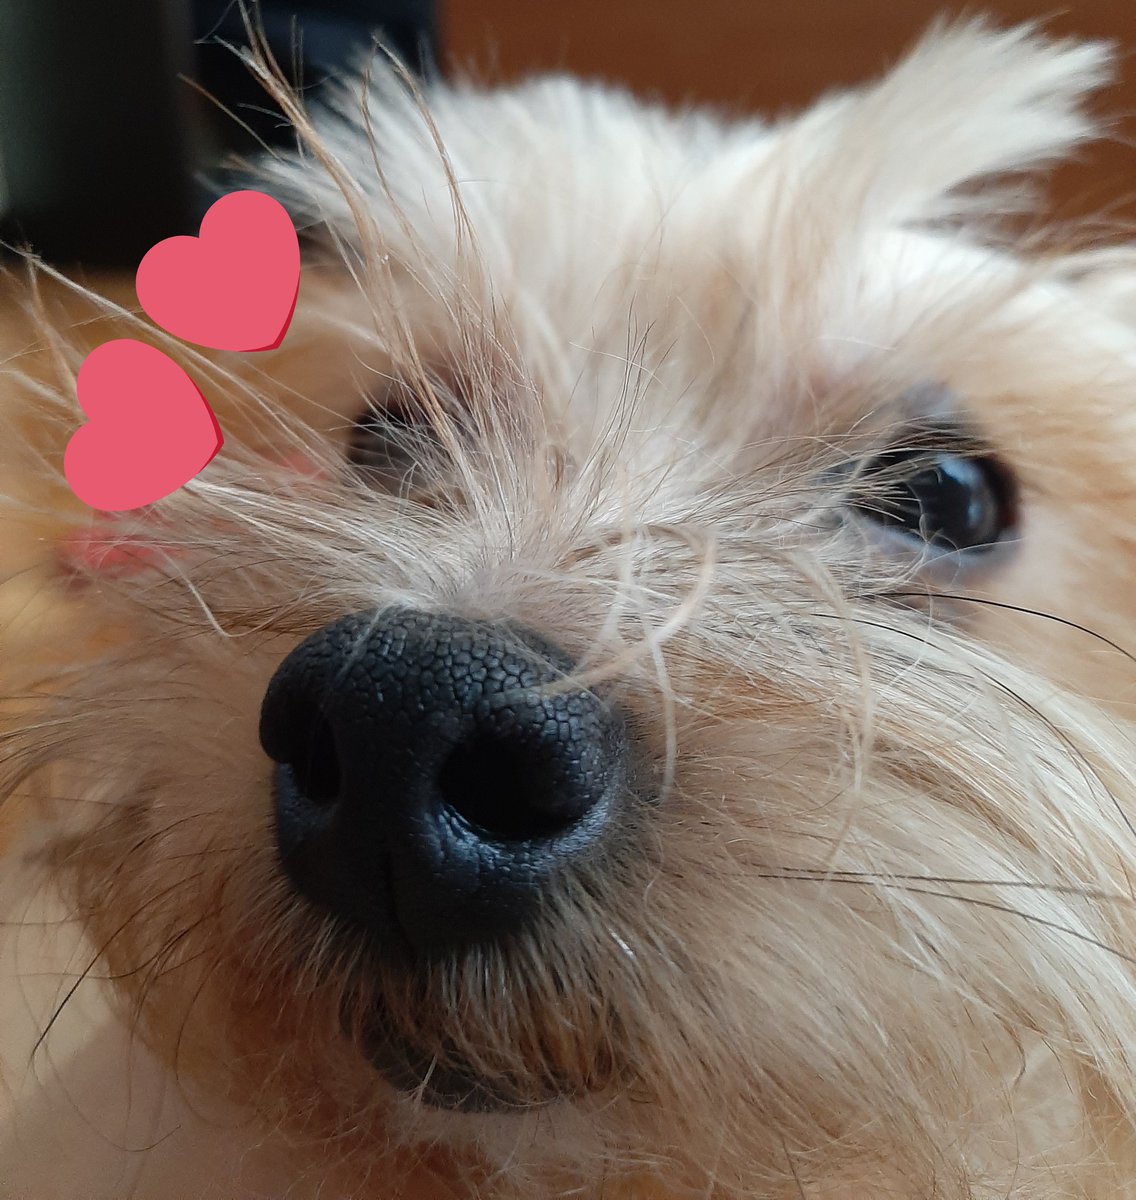  88/366seok !!!! today too, i hope your day passed happily and healthily ^^  have this close up pic of my dog and go to sleep thinking good thoughts !!